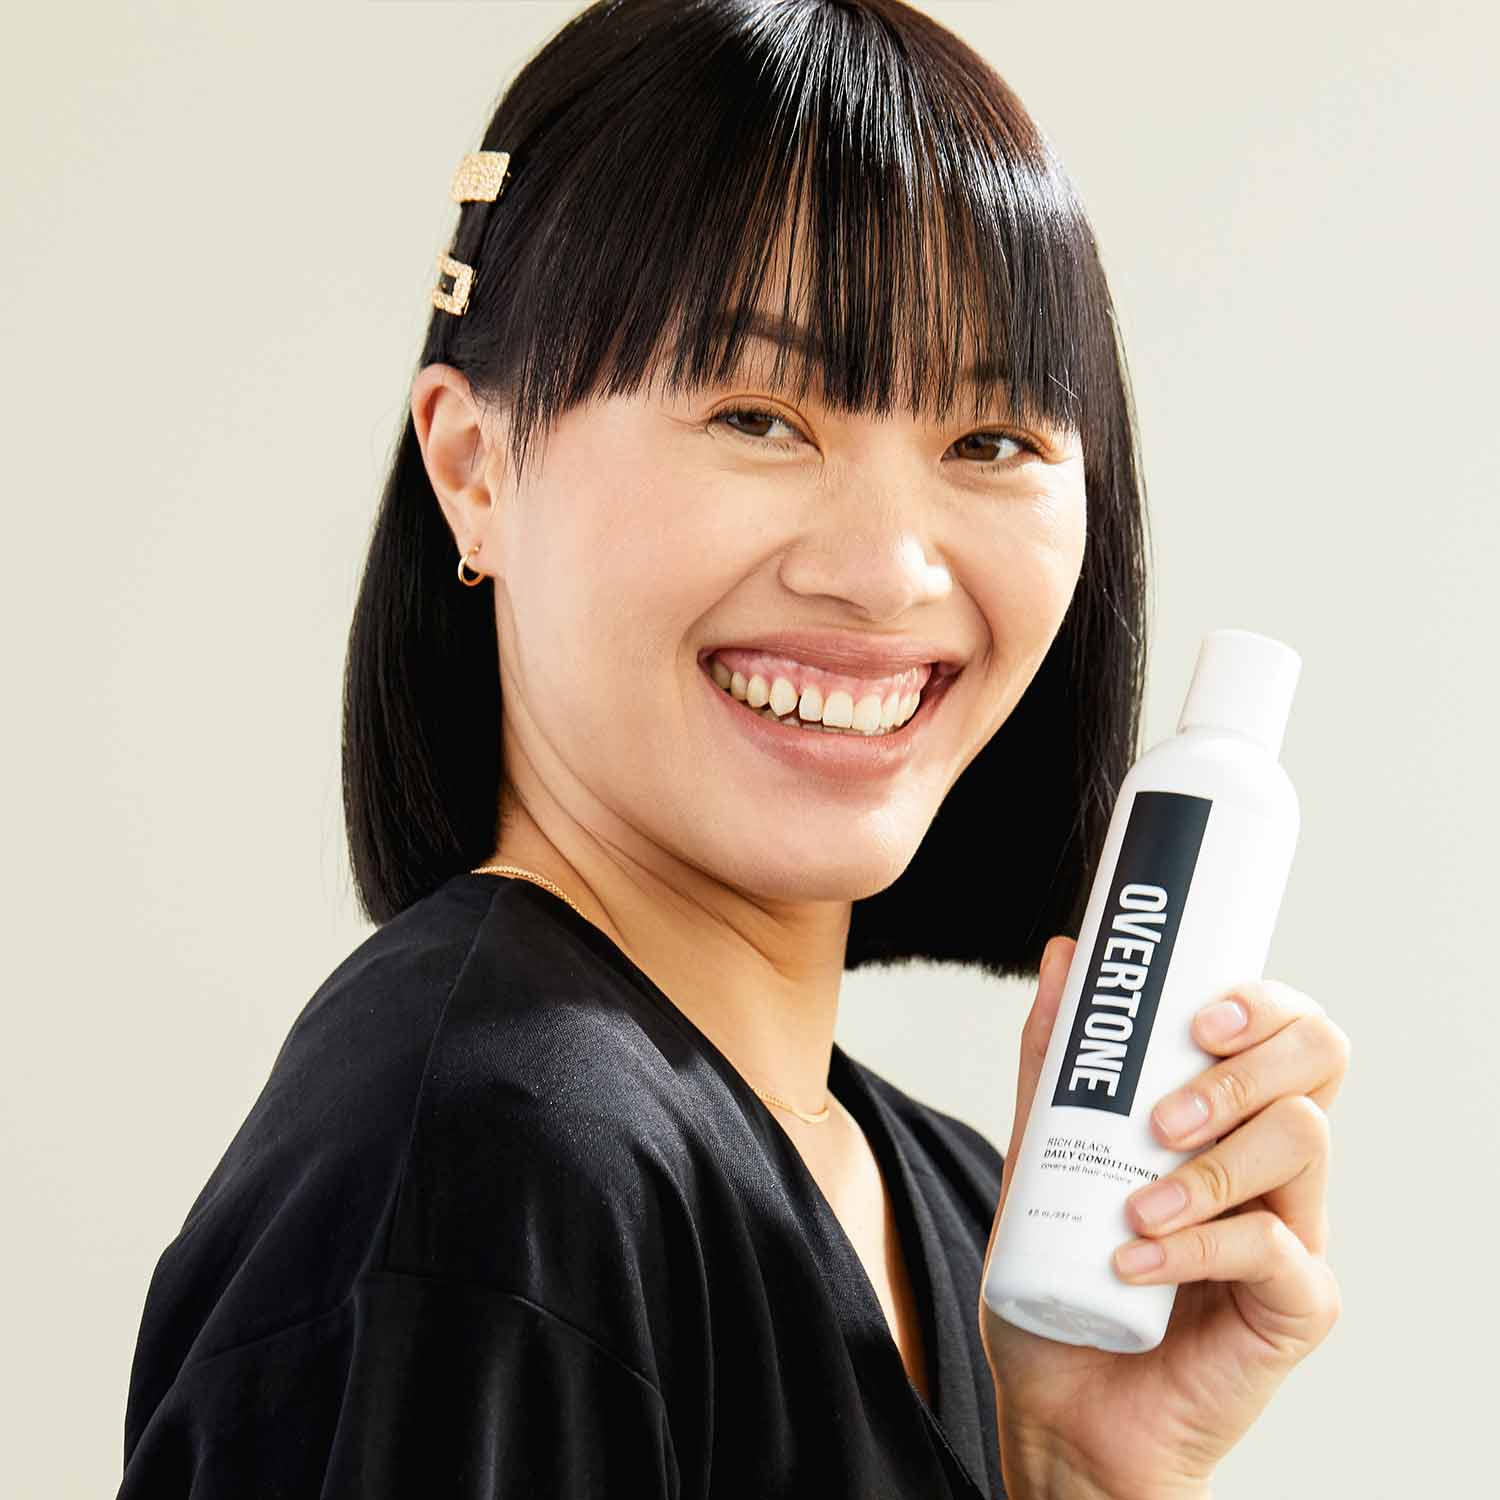 person with strait black hair color with short hair and bangs holding oVertone rich black daily conditioner